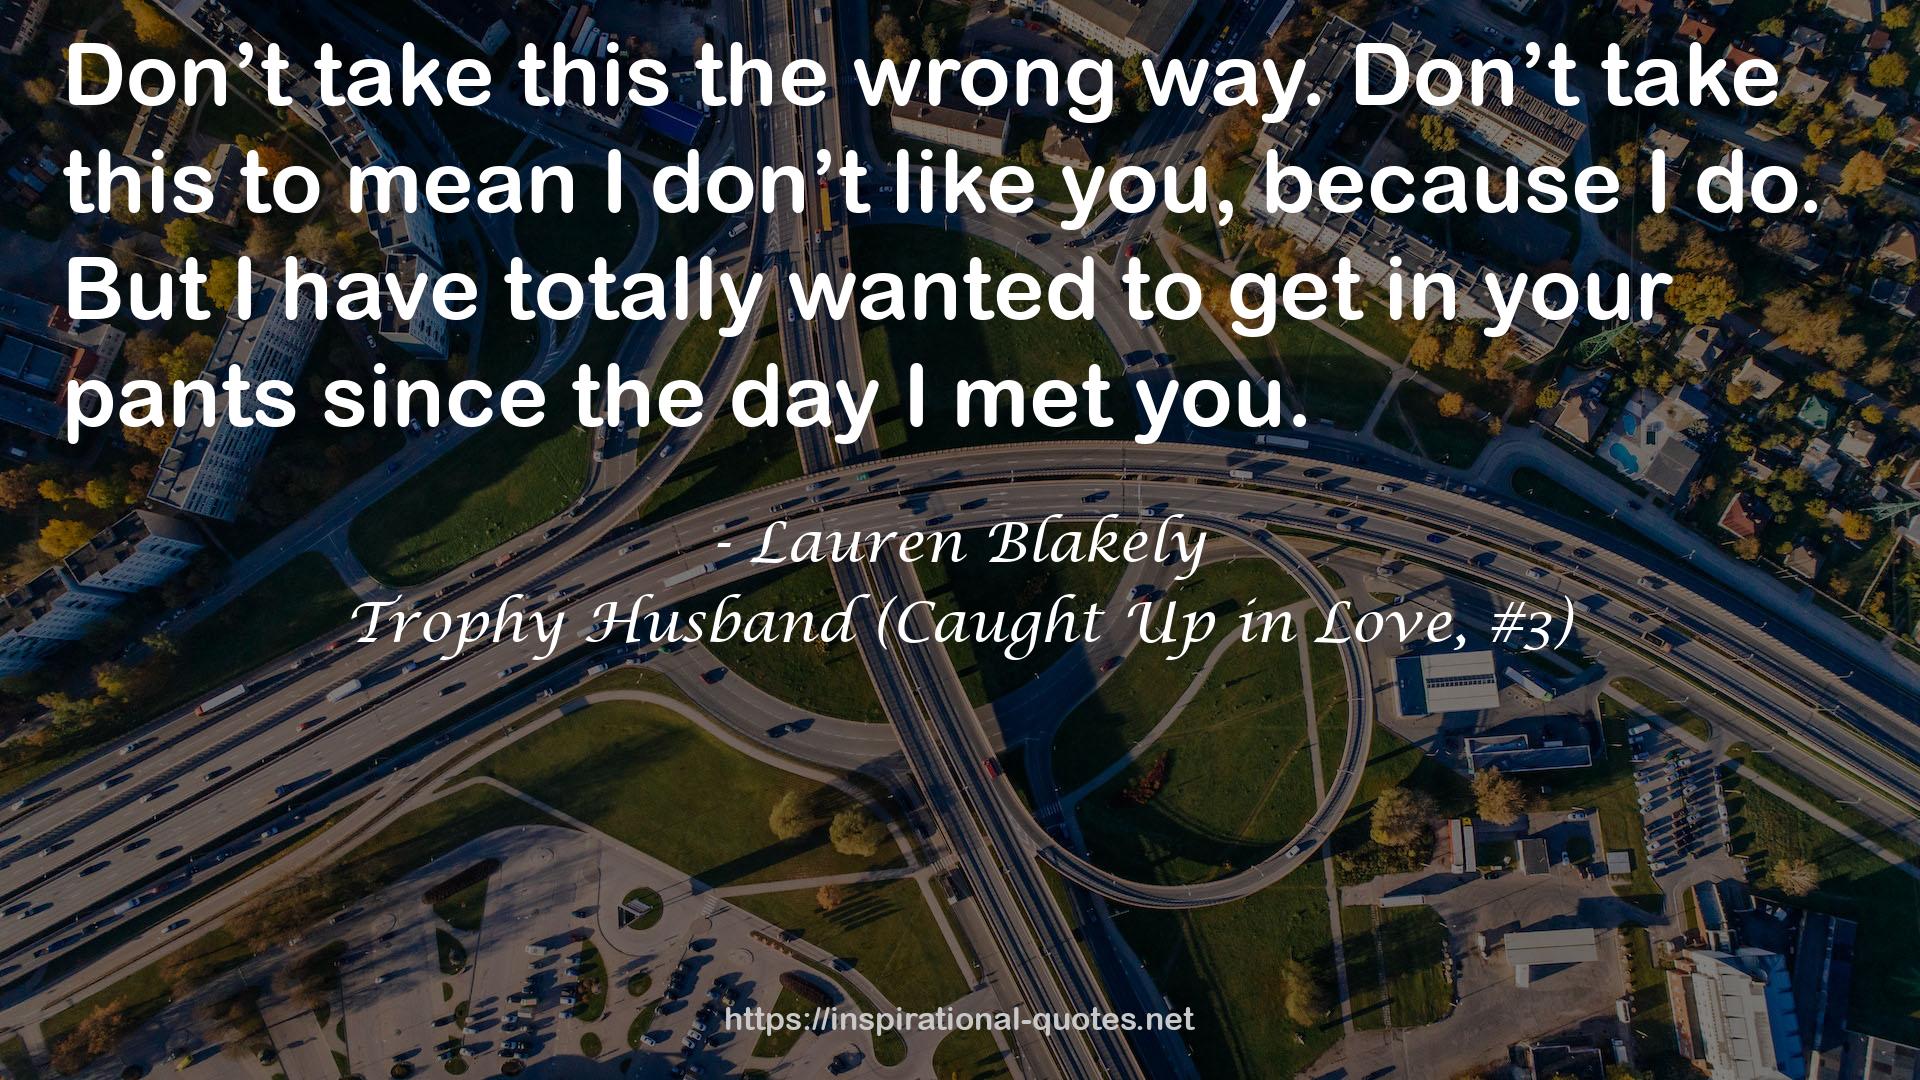 Trophy Husband (Caught Up in Love, #3) QUOTES